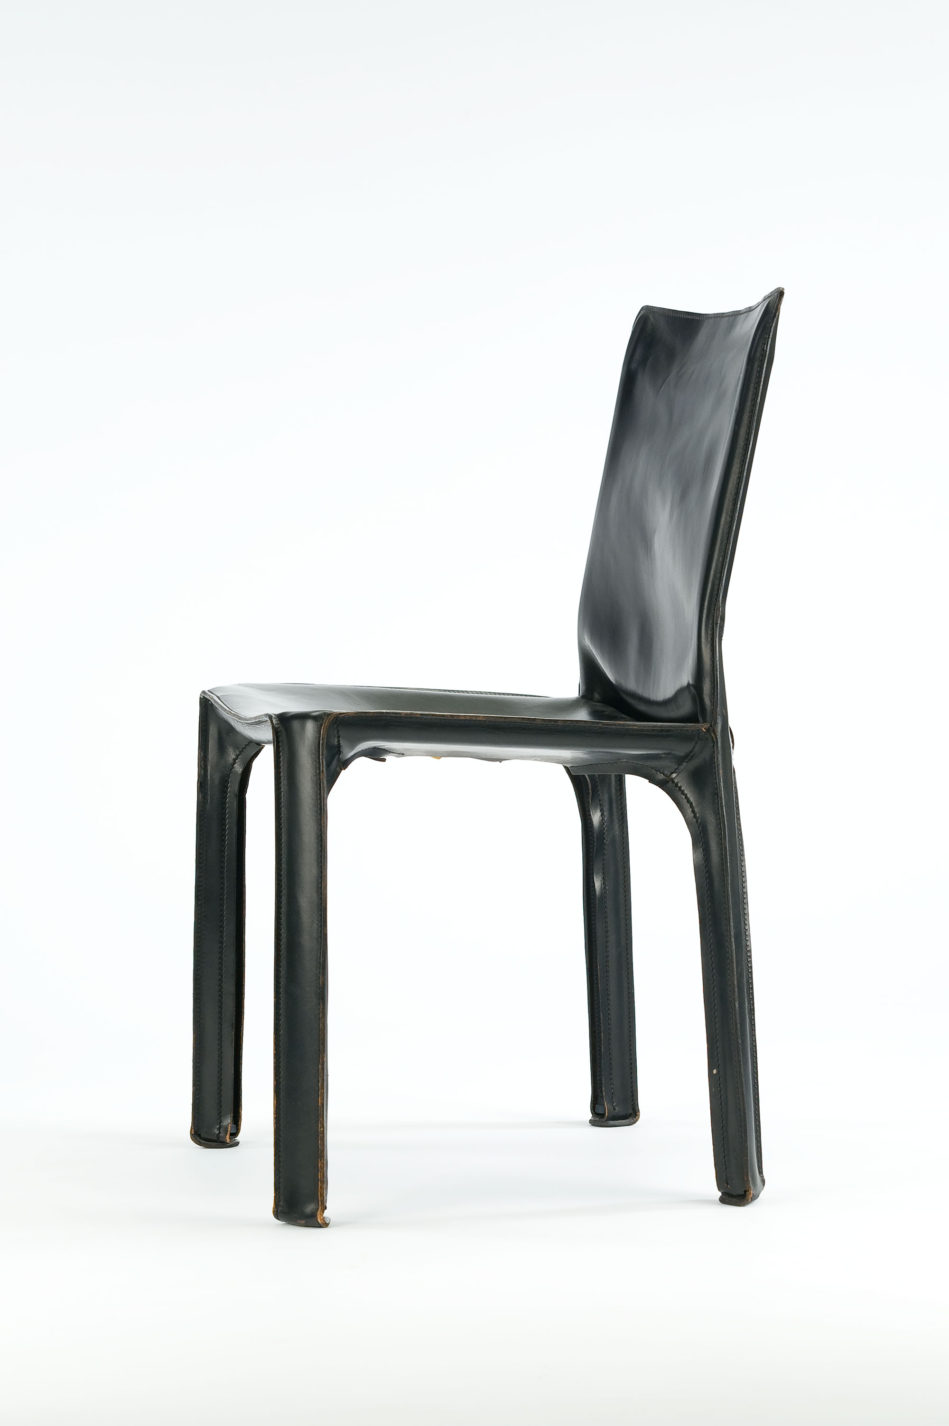 Simple four-legged side chair with full black leather slip cover.